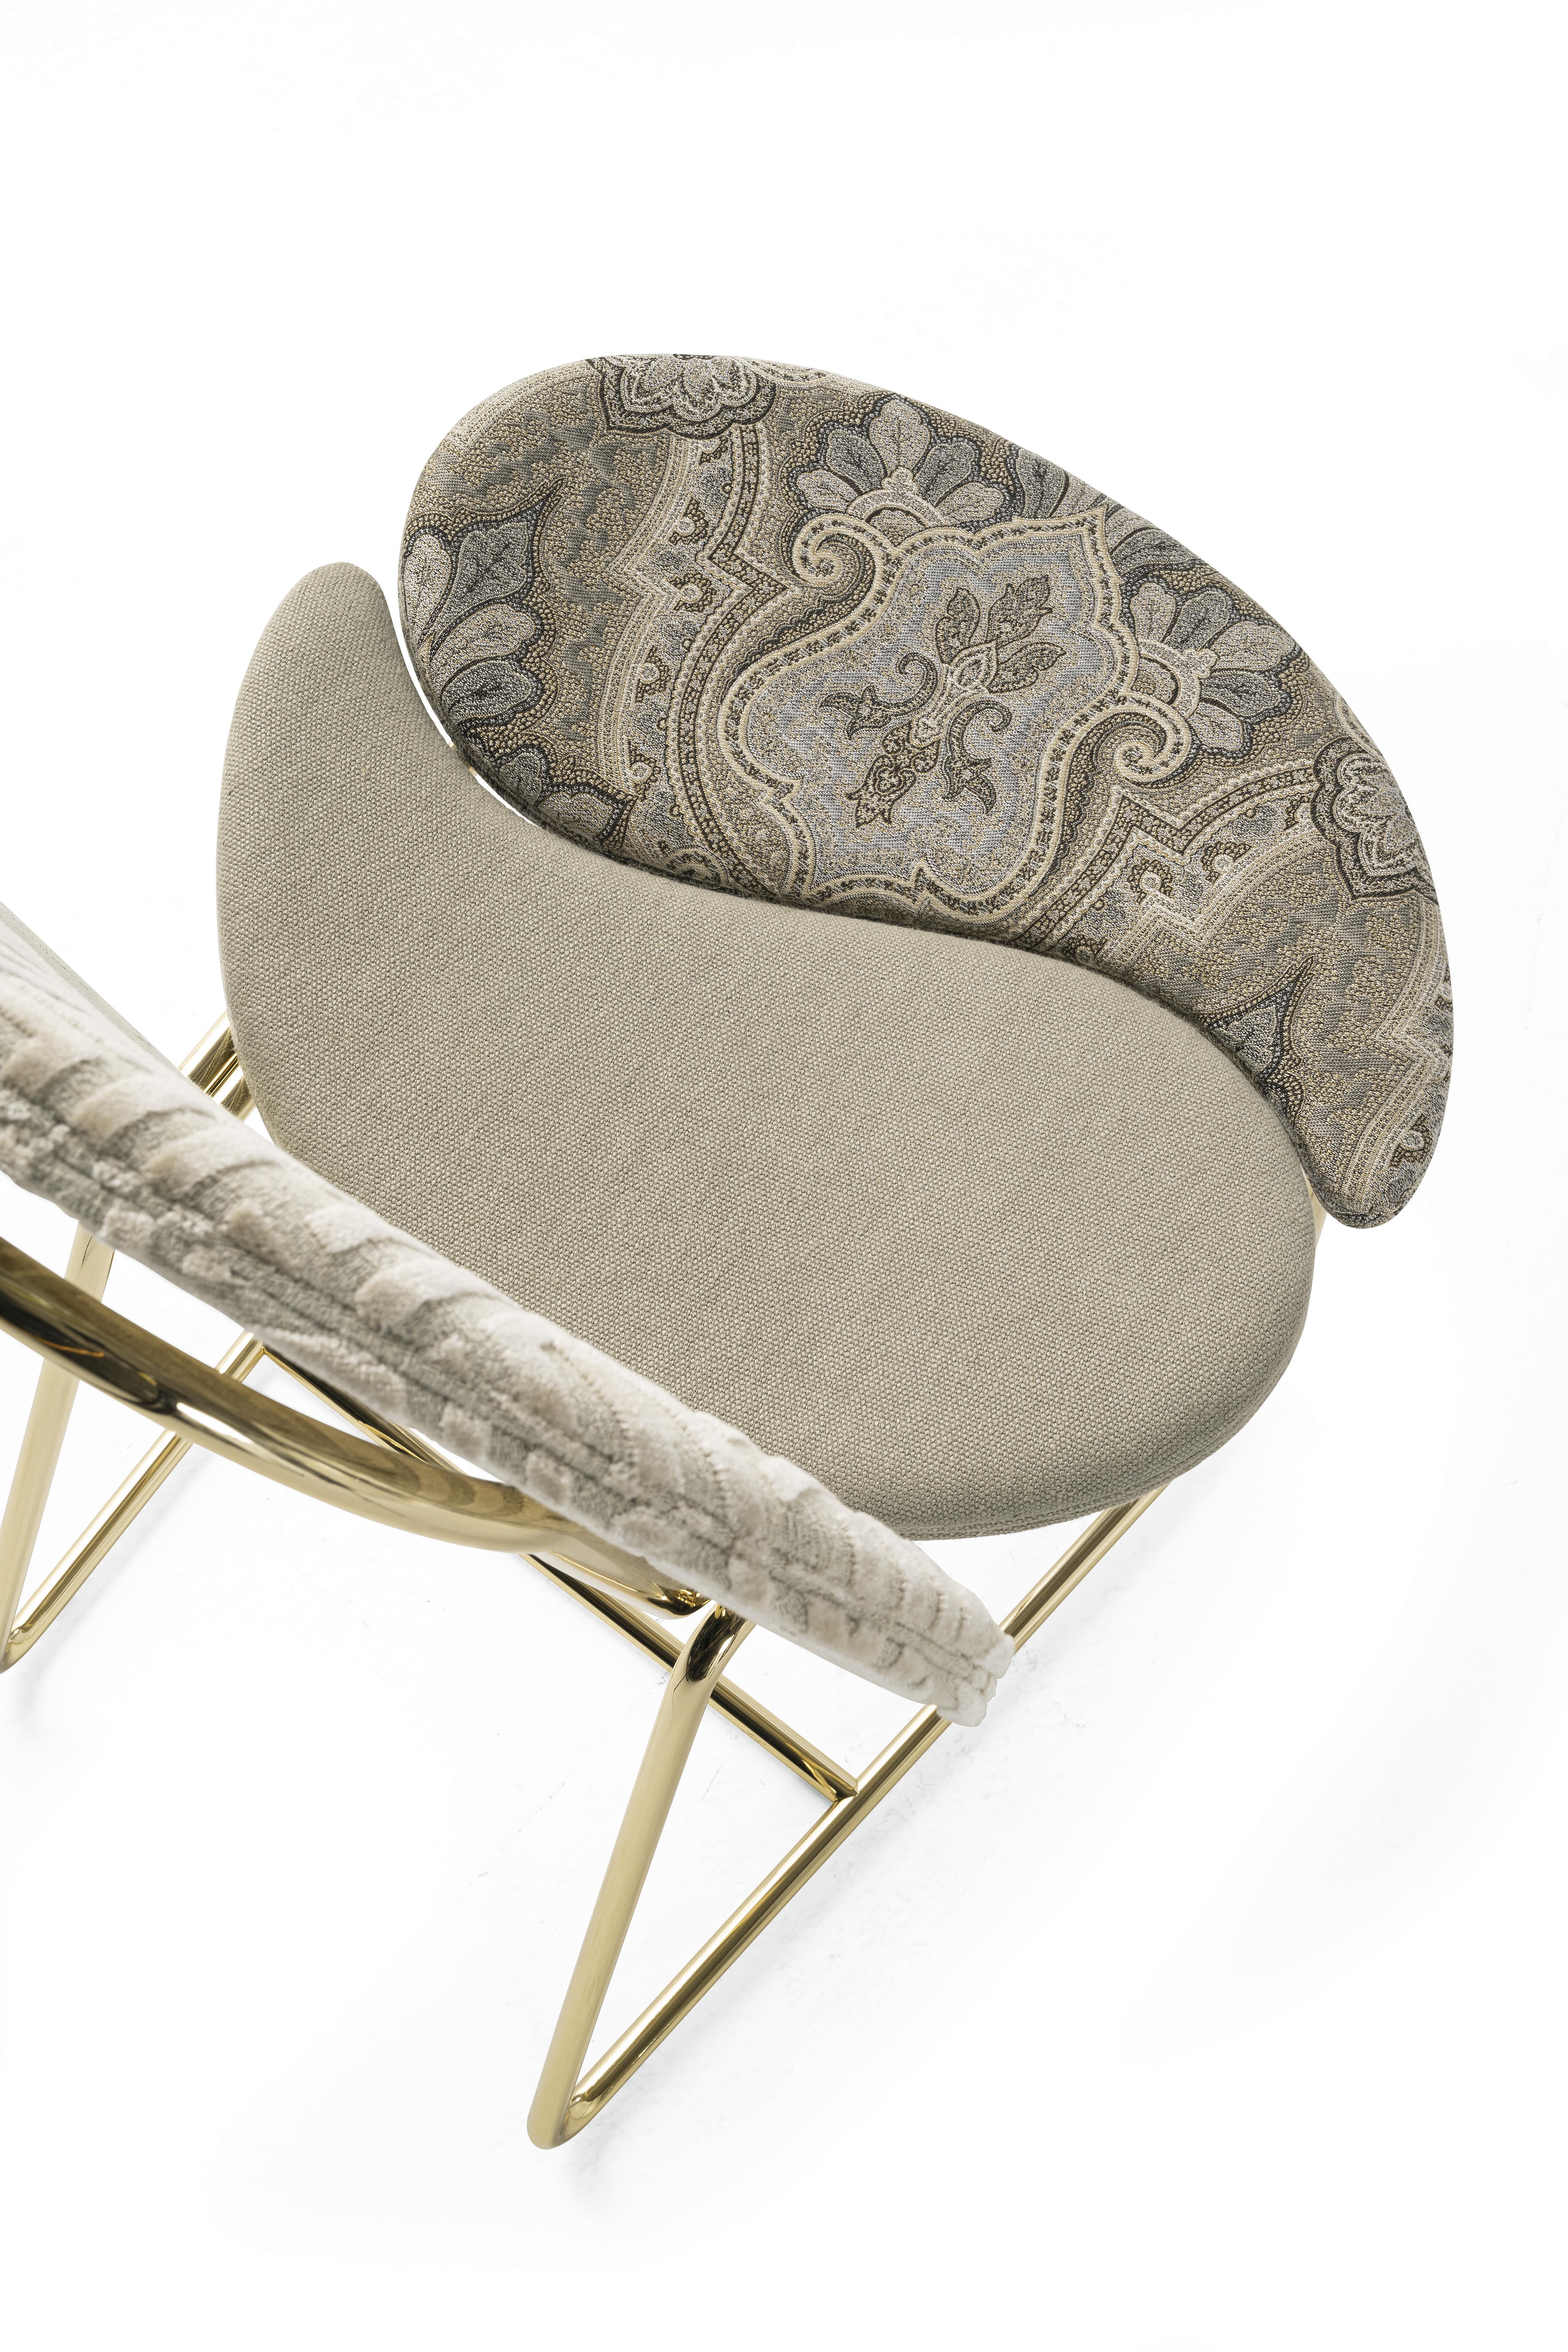 21st Century Shiraz Chair with Double Paisley by Etro Home Interiors In New Condition For Sale In Cantù, Lombardia